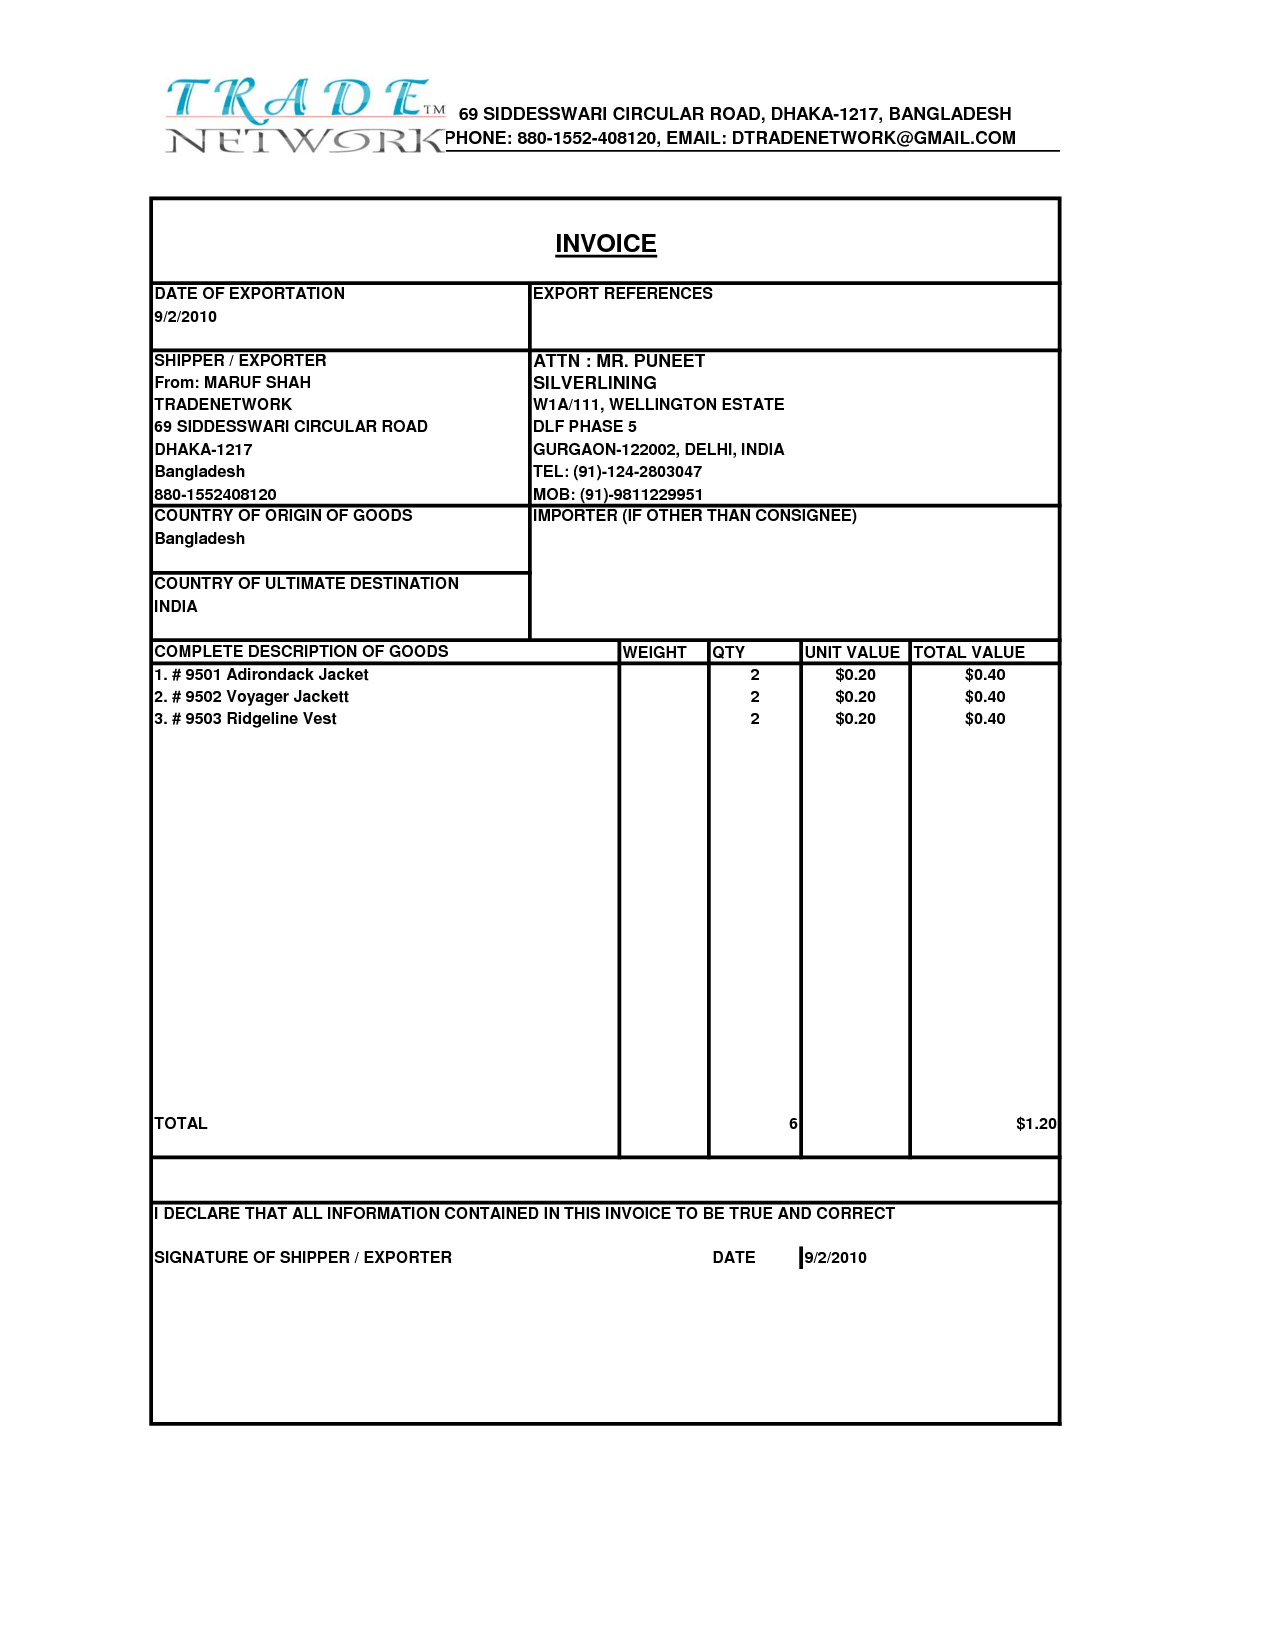 Lawn Care Invoice Template Word And 100 Invoice Template For With Regard To Invoice Template Word 2010